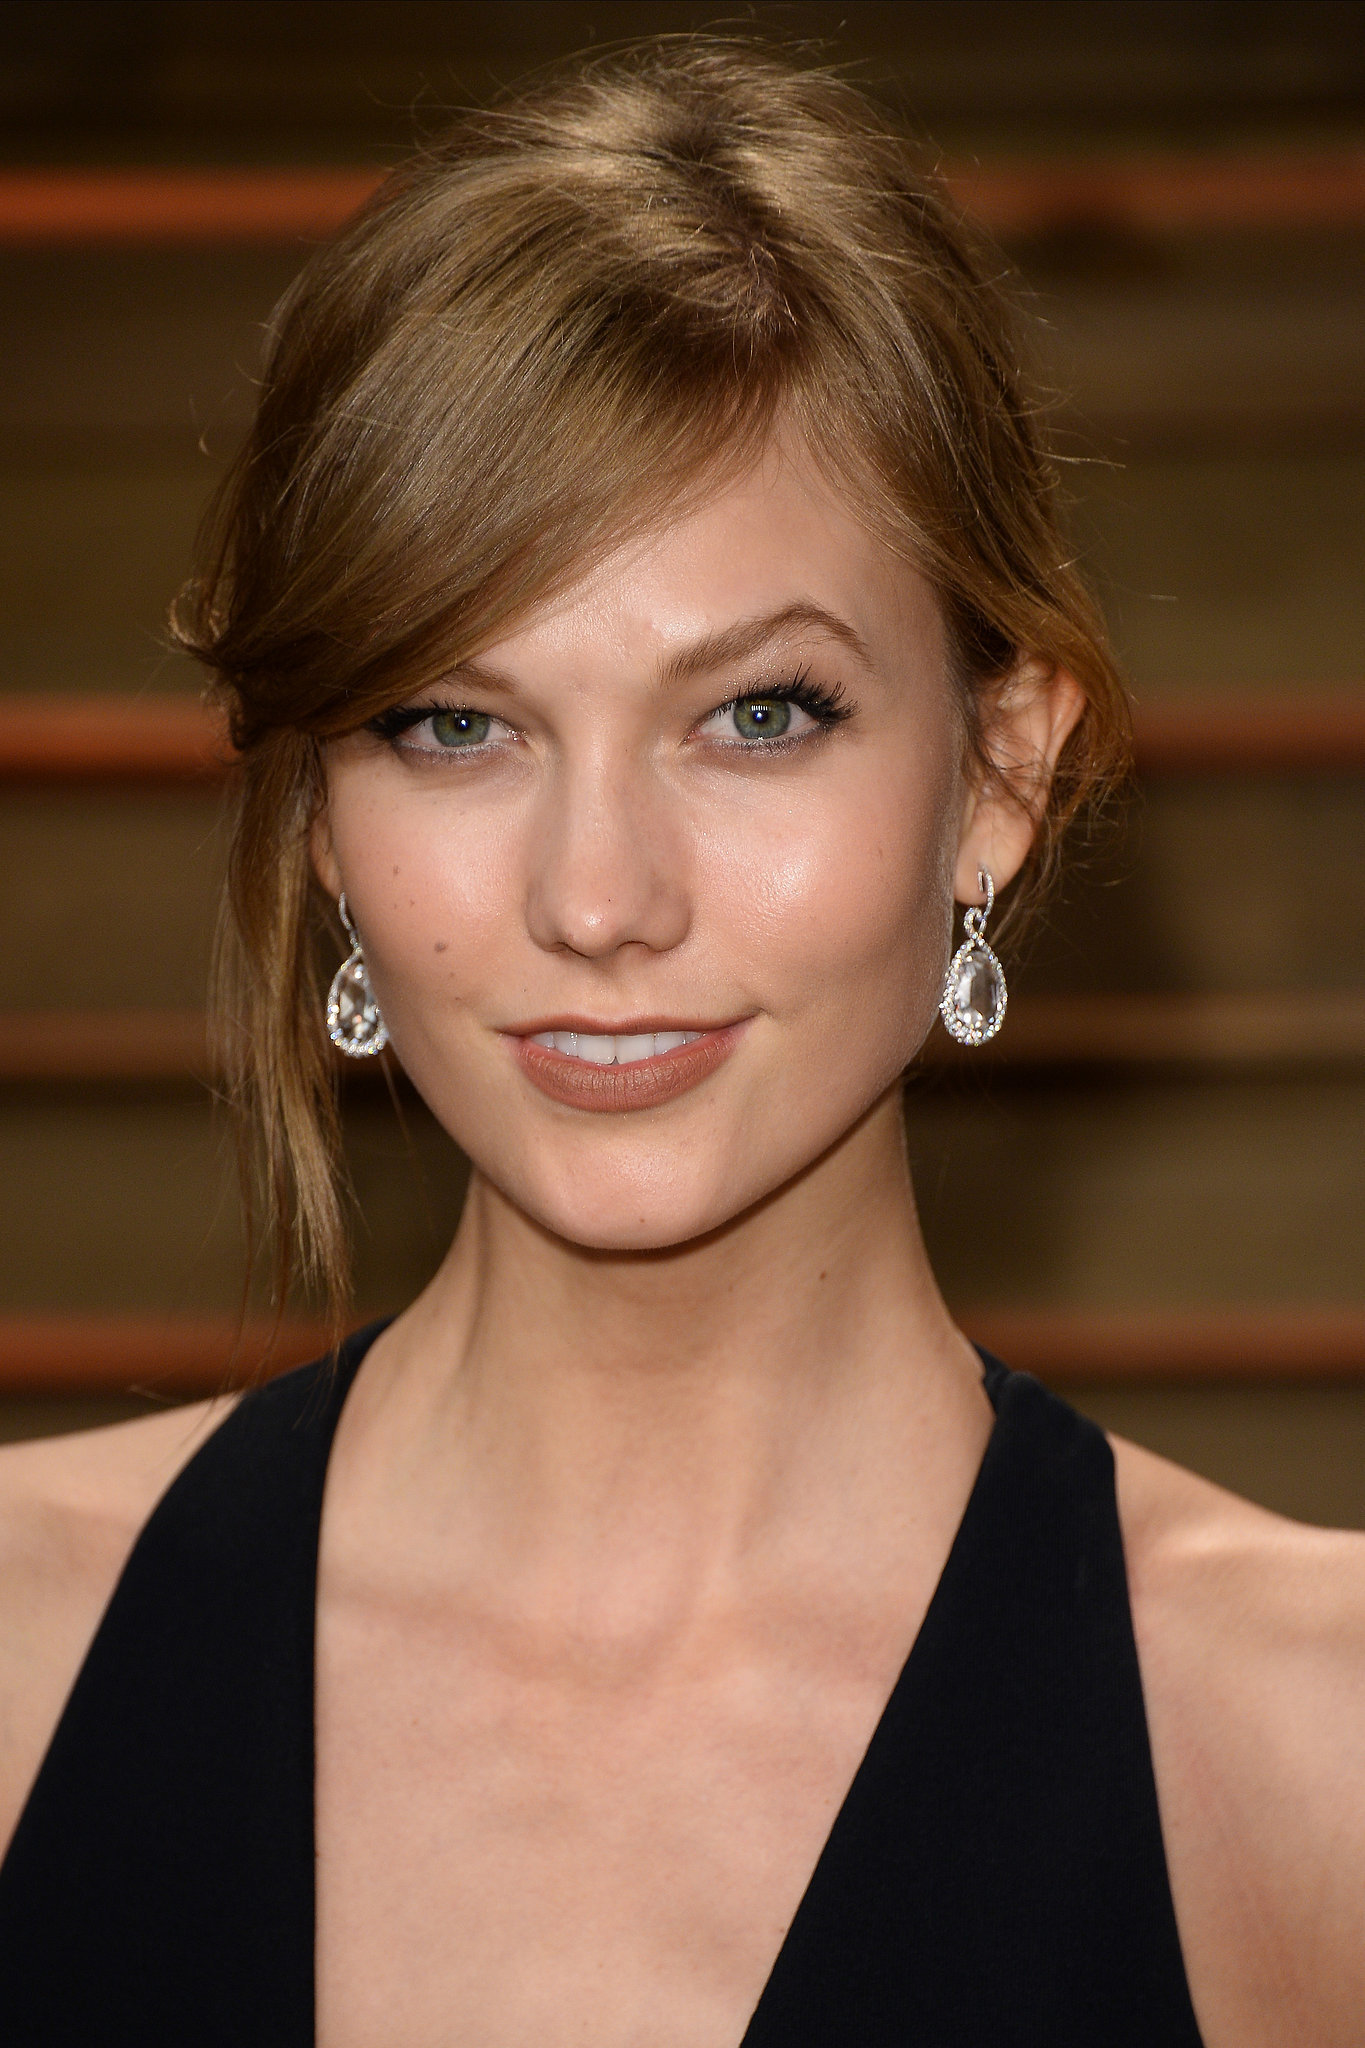 Karlie Kloss at Vanity Fair Party | The Golden Ticket to Every Beauty ...